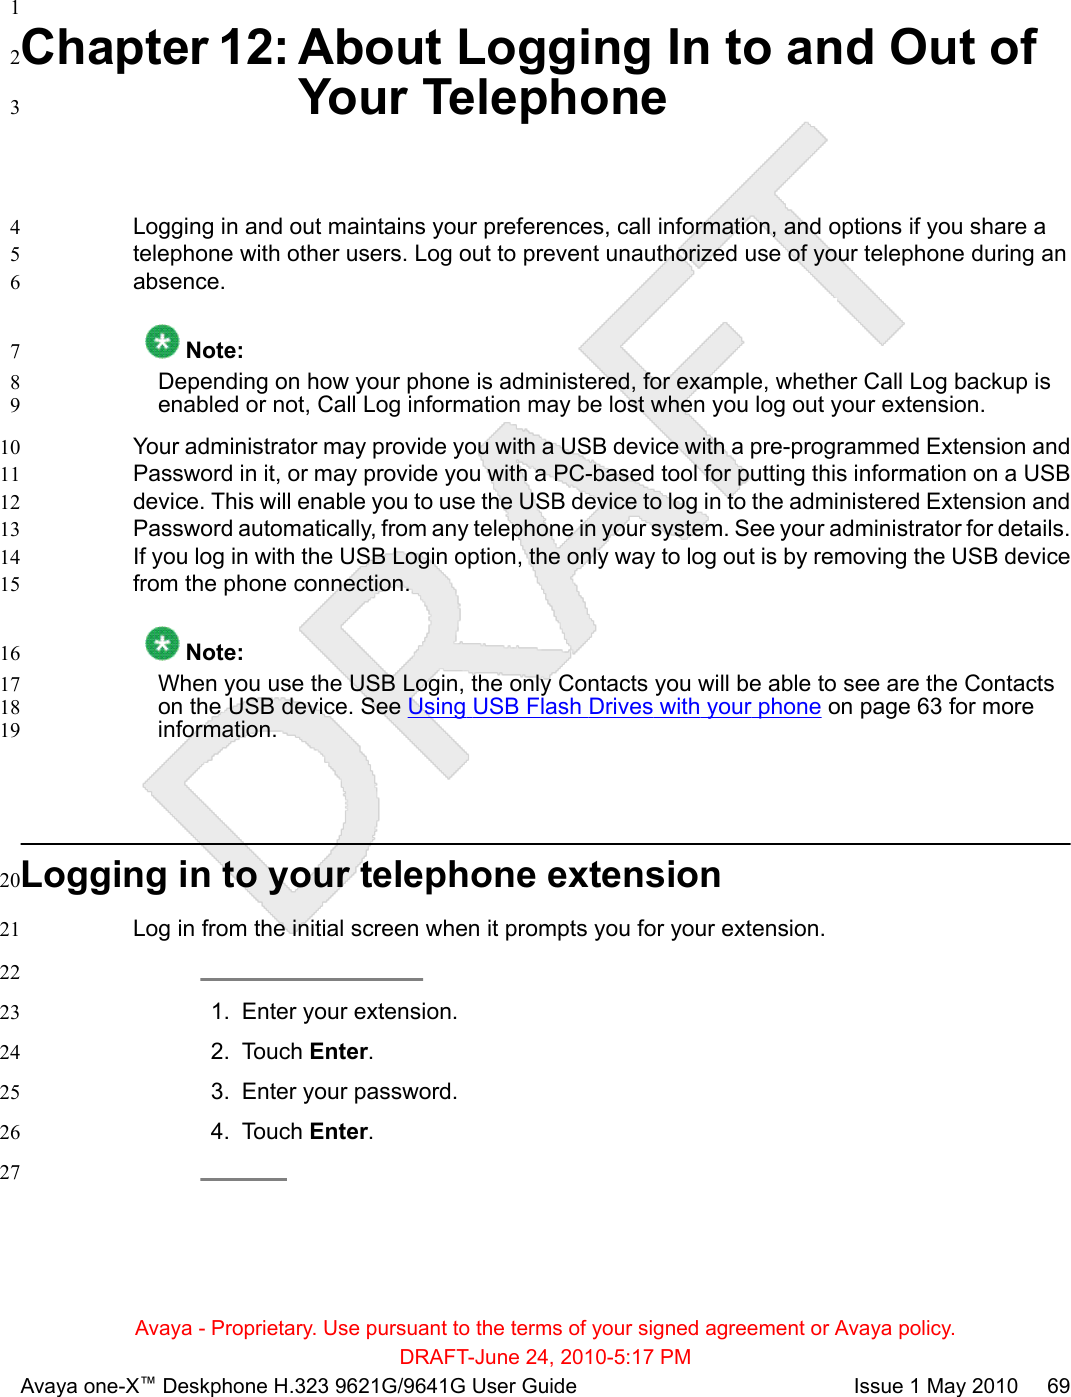 1Chapter 12: About Logging In to and Out of2Your Telephone3Logging in and out maintains your preferences, call information, and options if you share a4telephone with other users. Log out to prevent unauthorized use of your telephone during an5absence.6 Note:7Depending on how your phone is administered, for example, whether Call Log backup is8enabled or not, Call Log information may be lost when you log out your extension.9Your administrator may provide you with a USB device with a pre-programmed Extension and10Password in it, or may provide you with a PC-based tool for putting this information on a USB11device. This will enable you to use the USB device to log in to the administered Extension and12Password automatically, from any telephone in your system. See your administrator for details.13If you log in with the USB Login option, the only way to log out is by removing the USB device14from the phone connection.15 Note:16When you use the USB Login, the only Contacts you will be able to see are the Contacts17on the USB device. See Using USB Flash Drives with your phone on page 63 for more18information.19Logging in to your telephone extension20Log in from the initial screen when it prompts you for your extension.21221. Enter your extension.232. Touch Enter.243. Enter your password.254. Touch Enter.2627Avaya - Proprietary. Use pursuant to the terms of your signed agreement or Avaya policy.DRAFT-June 24, 2010-5:17 PMAvaya one-X™ Deskphone H.323 9621G/9641G User Guide Issue 1 May 2010     69